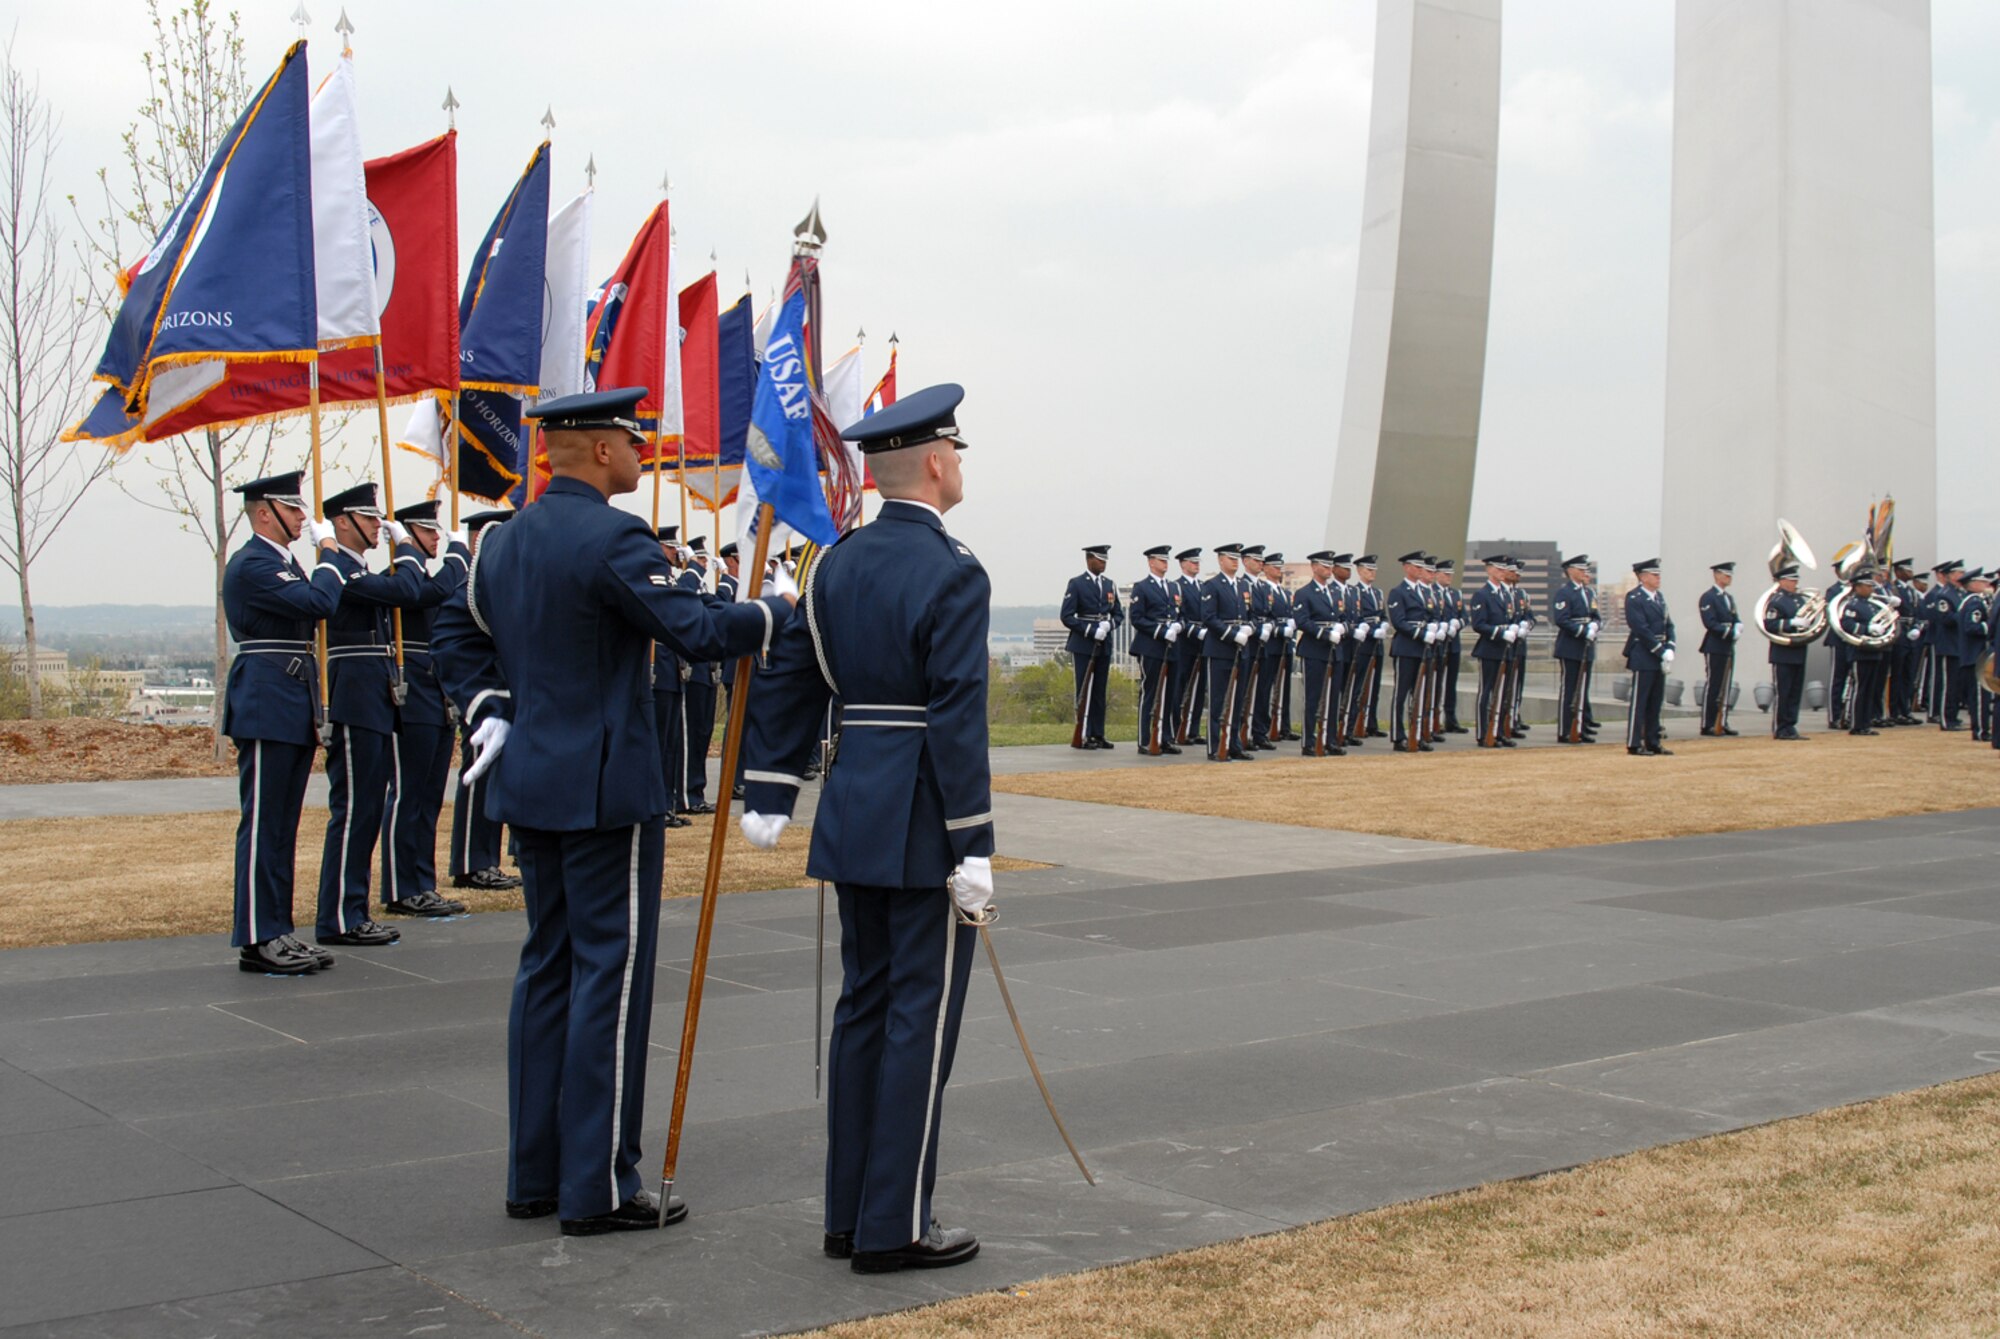 ARLINGTON, Va. -- The Air Force Honor Guard performs a pass and review ceremony for the reviewing official, Maj. Gen. Robert Smolen, Air Force District of Washington commander.  The pass and review was part of the Air Force Review held April 14 at the Air Force Memorial.